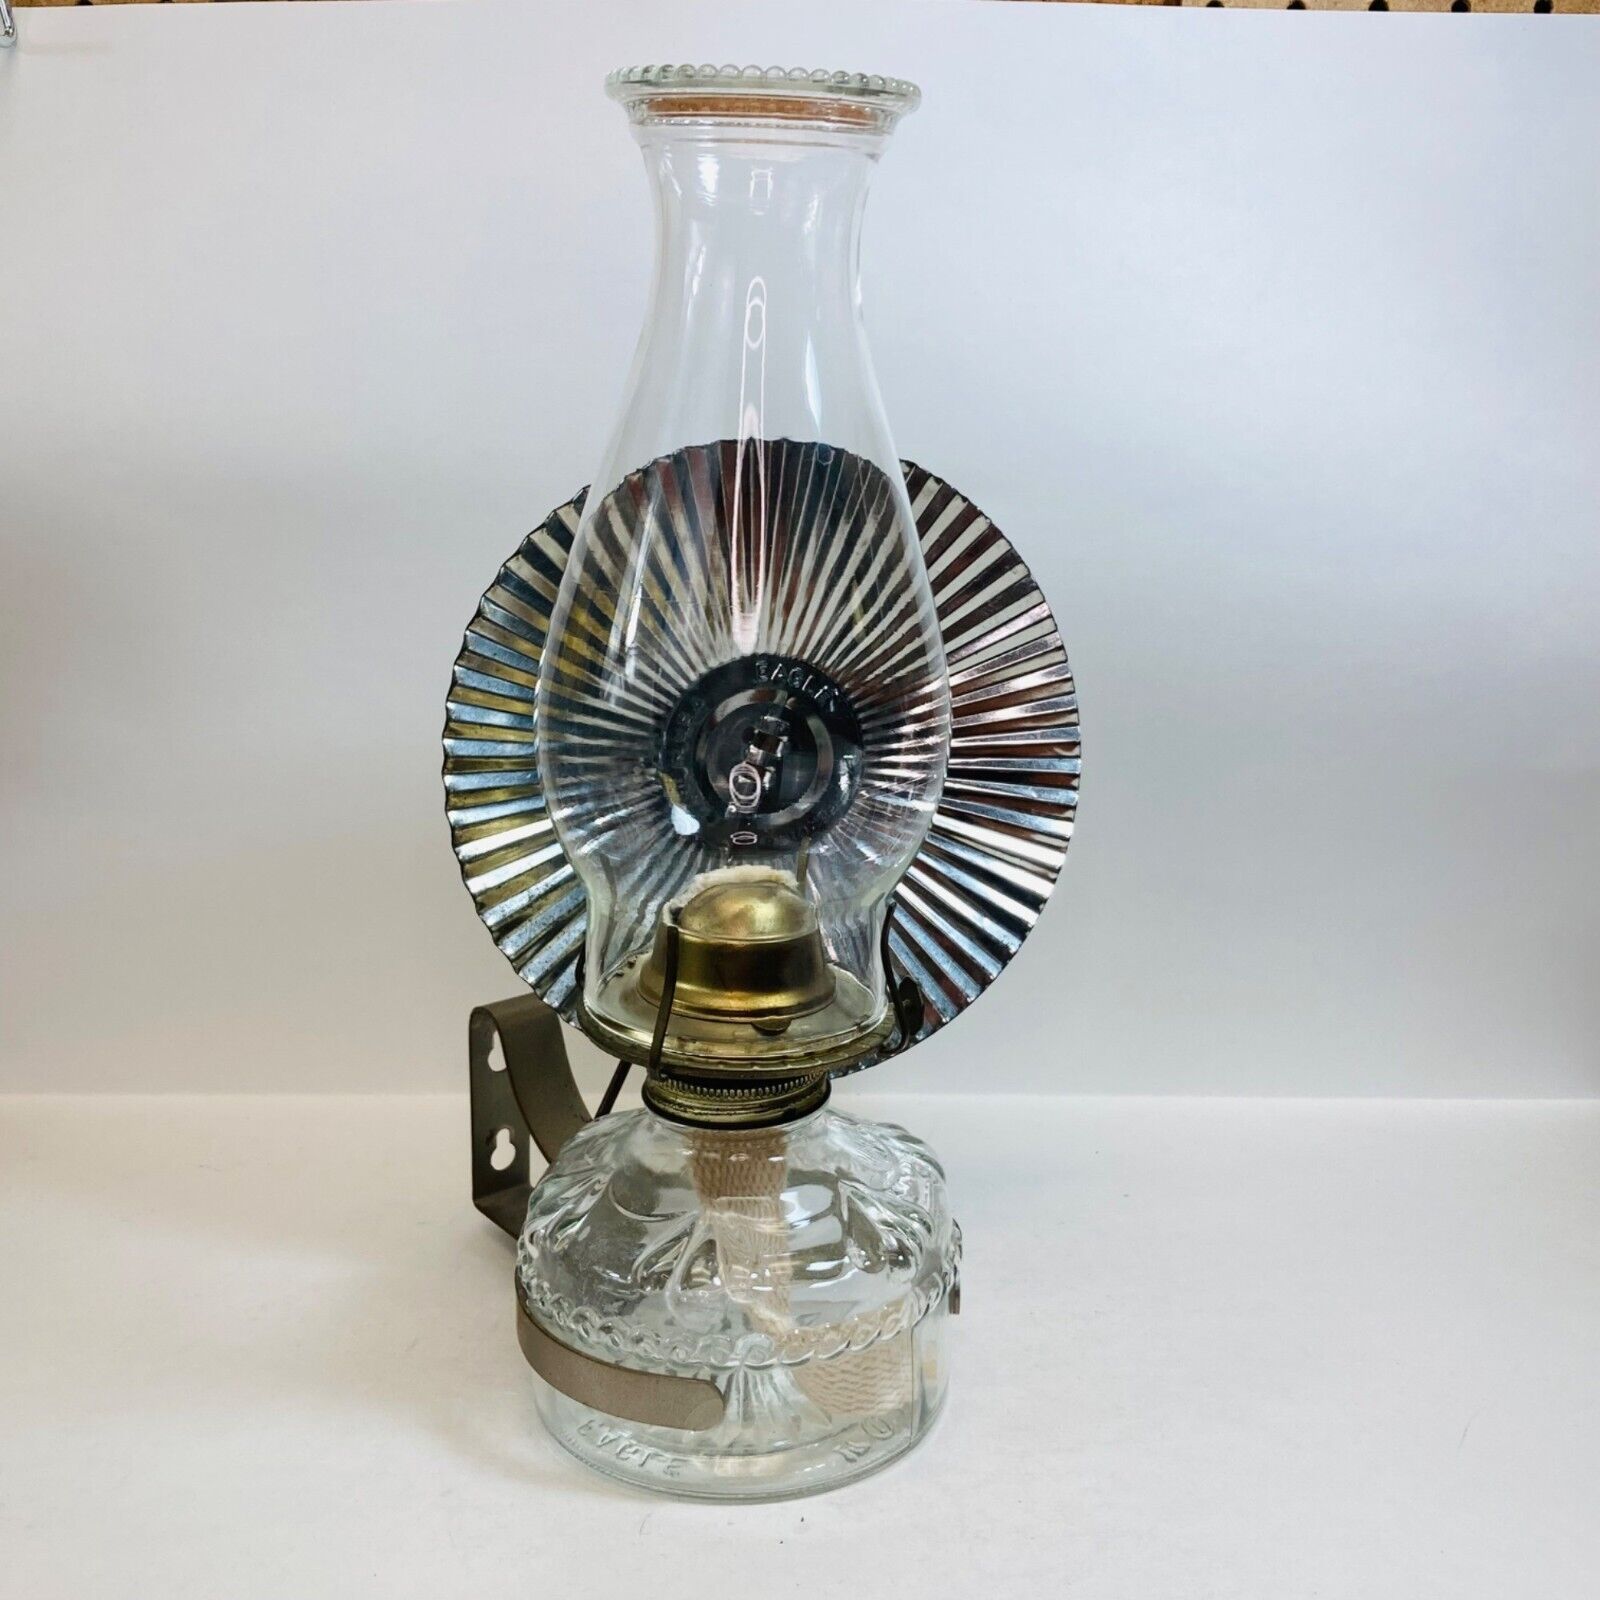 Antique Eagle Oil Lamp Reflector Glass Aluminum Chimney As is 13 x 6.5 inches